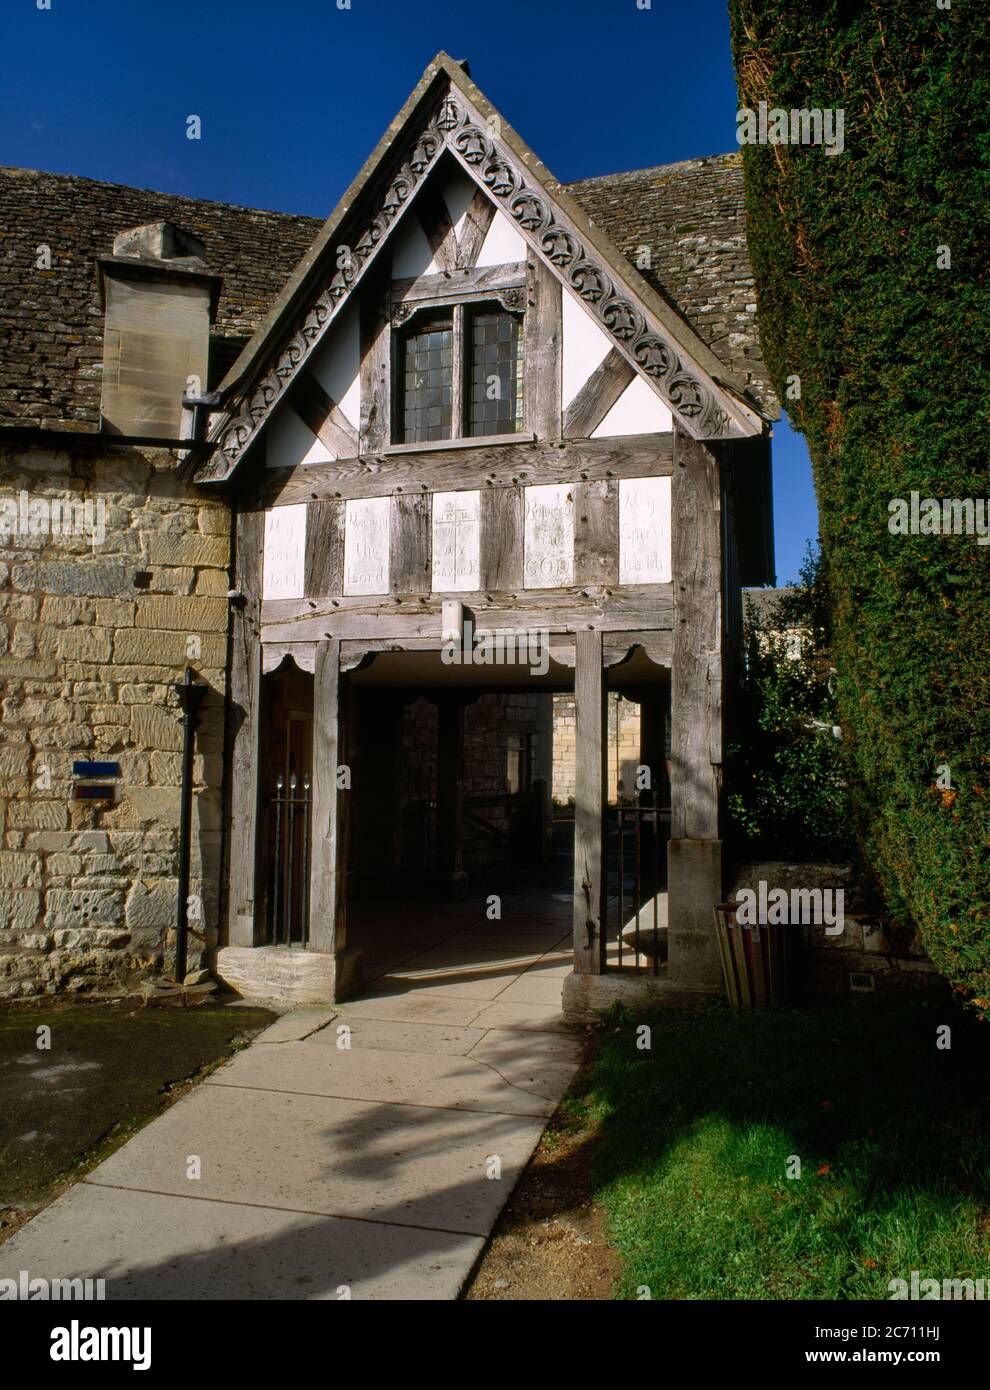 View W of the Lych Gate between St Mary's Churchyard & New Street, Painswick, Gloucestershire, England, UK. Built 1901 for Mrs Frances Sarah Williams. Stock Photo